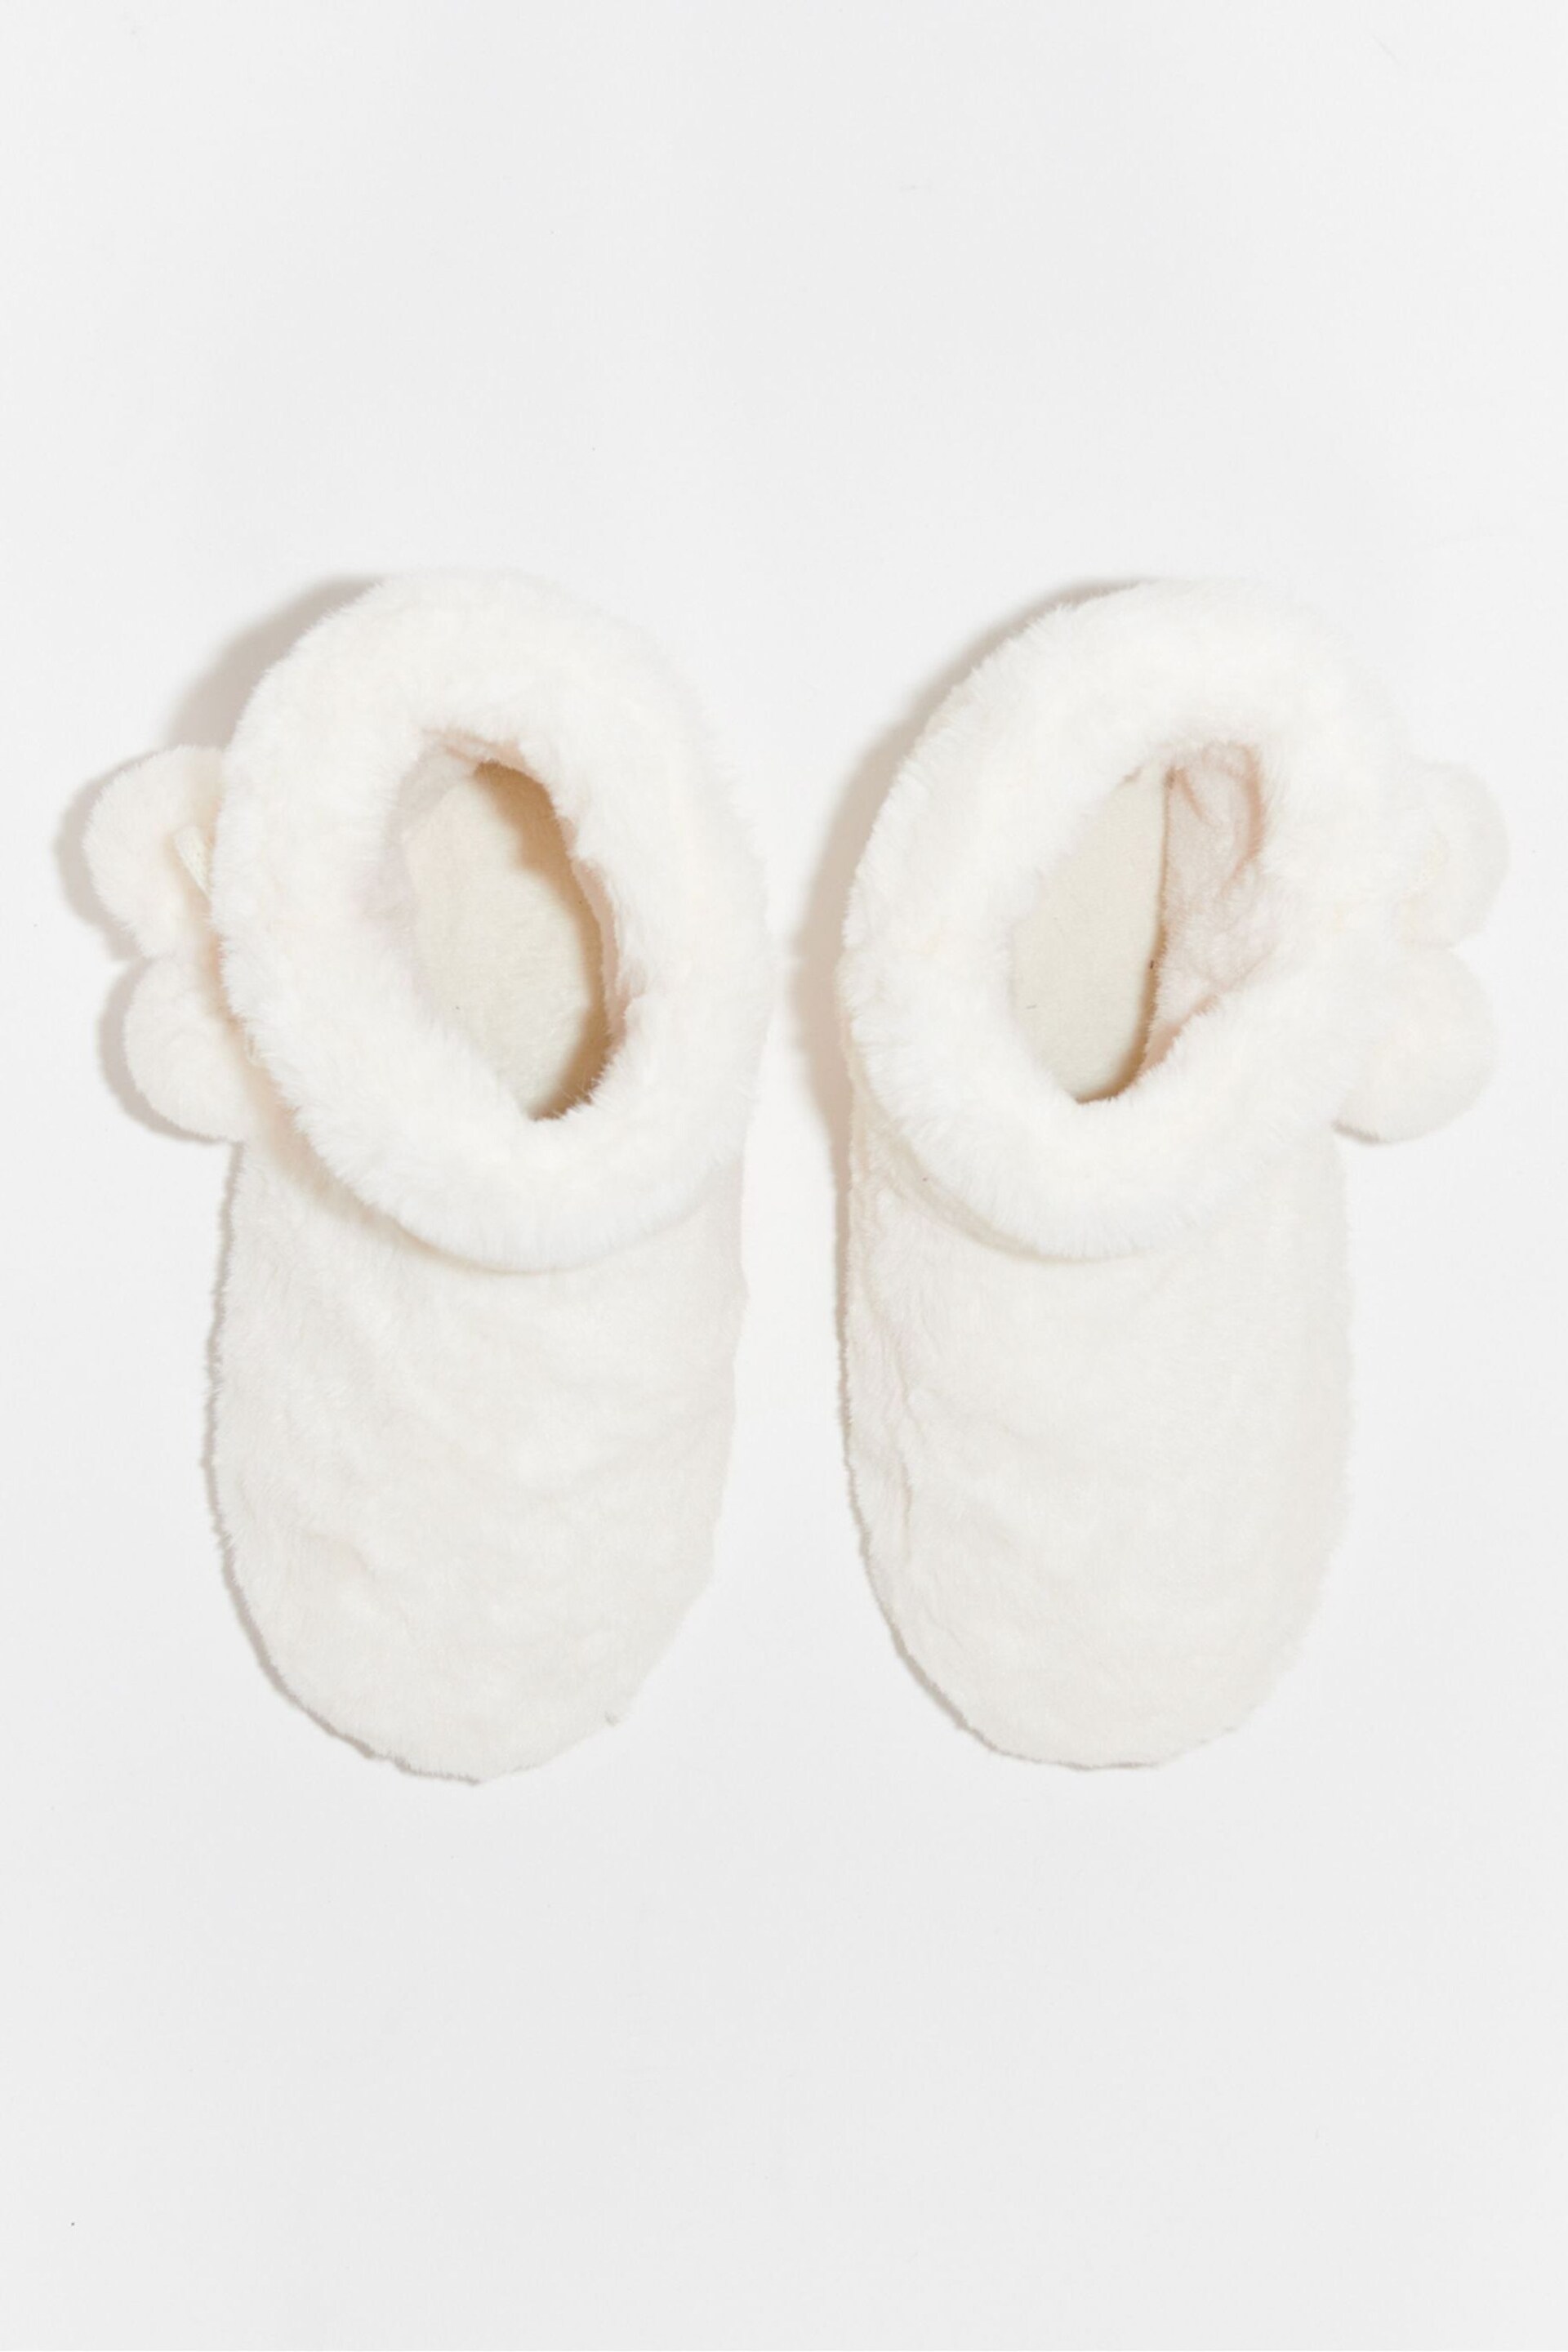 Boux Avenue Plush Slippers Boots - Image 2 of 2